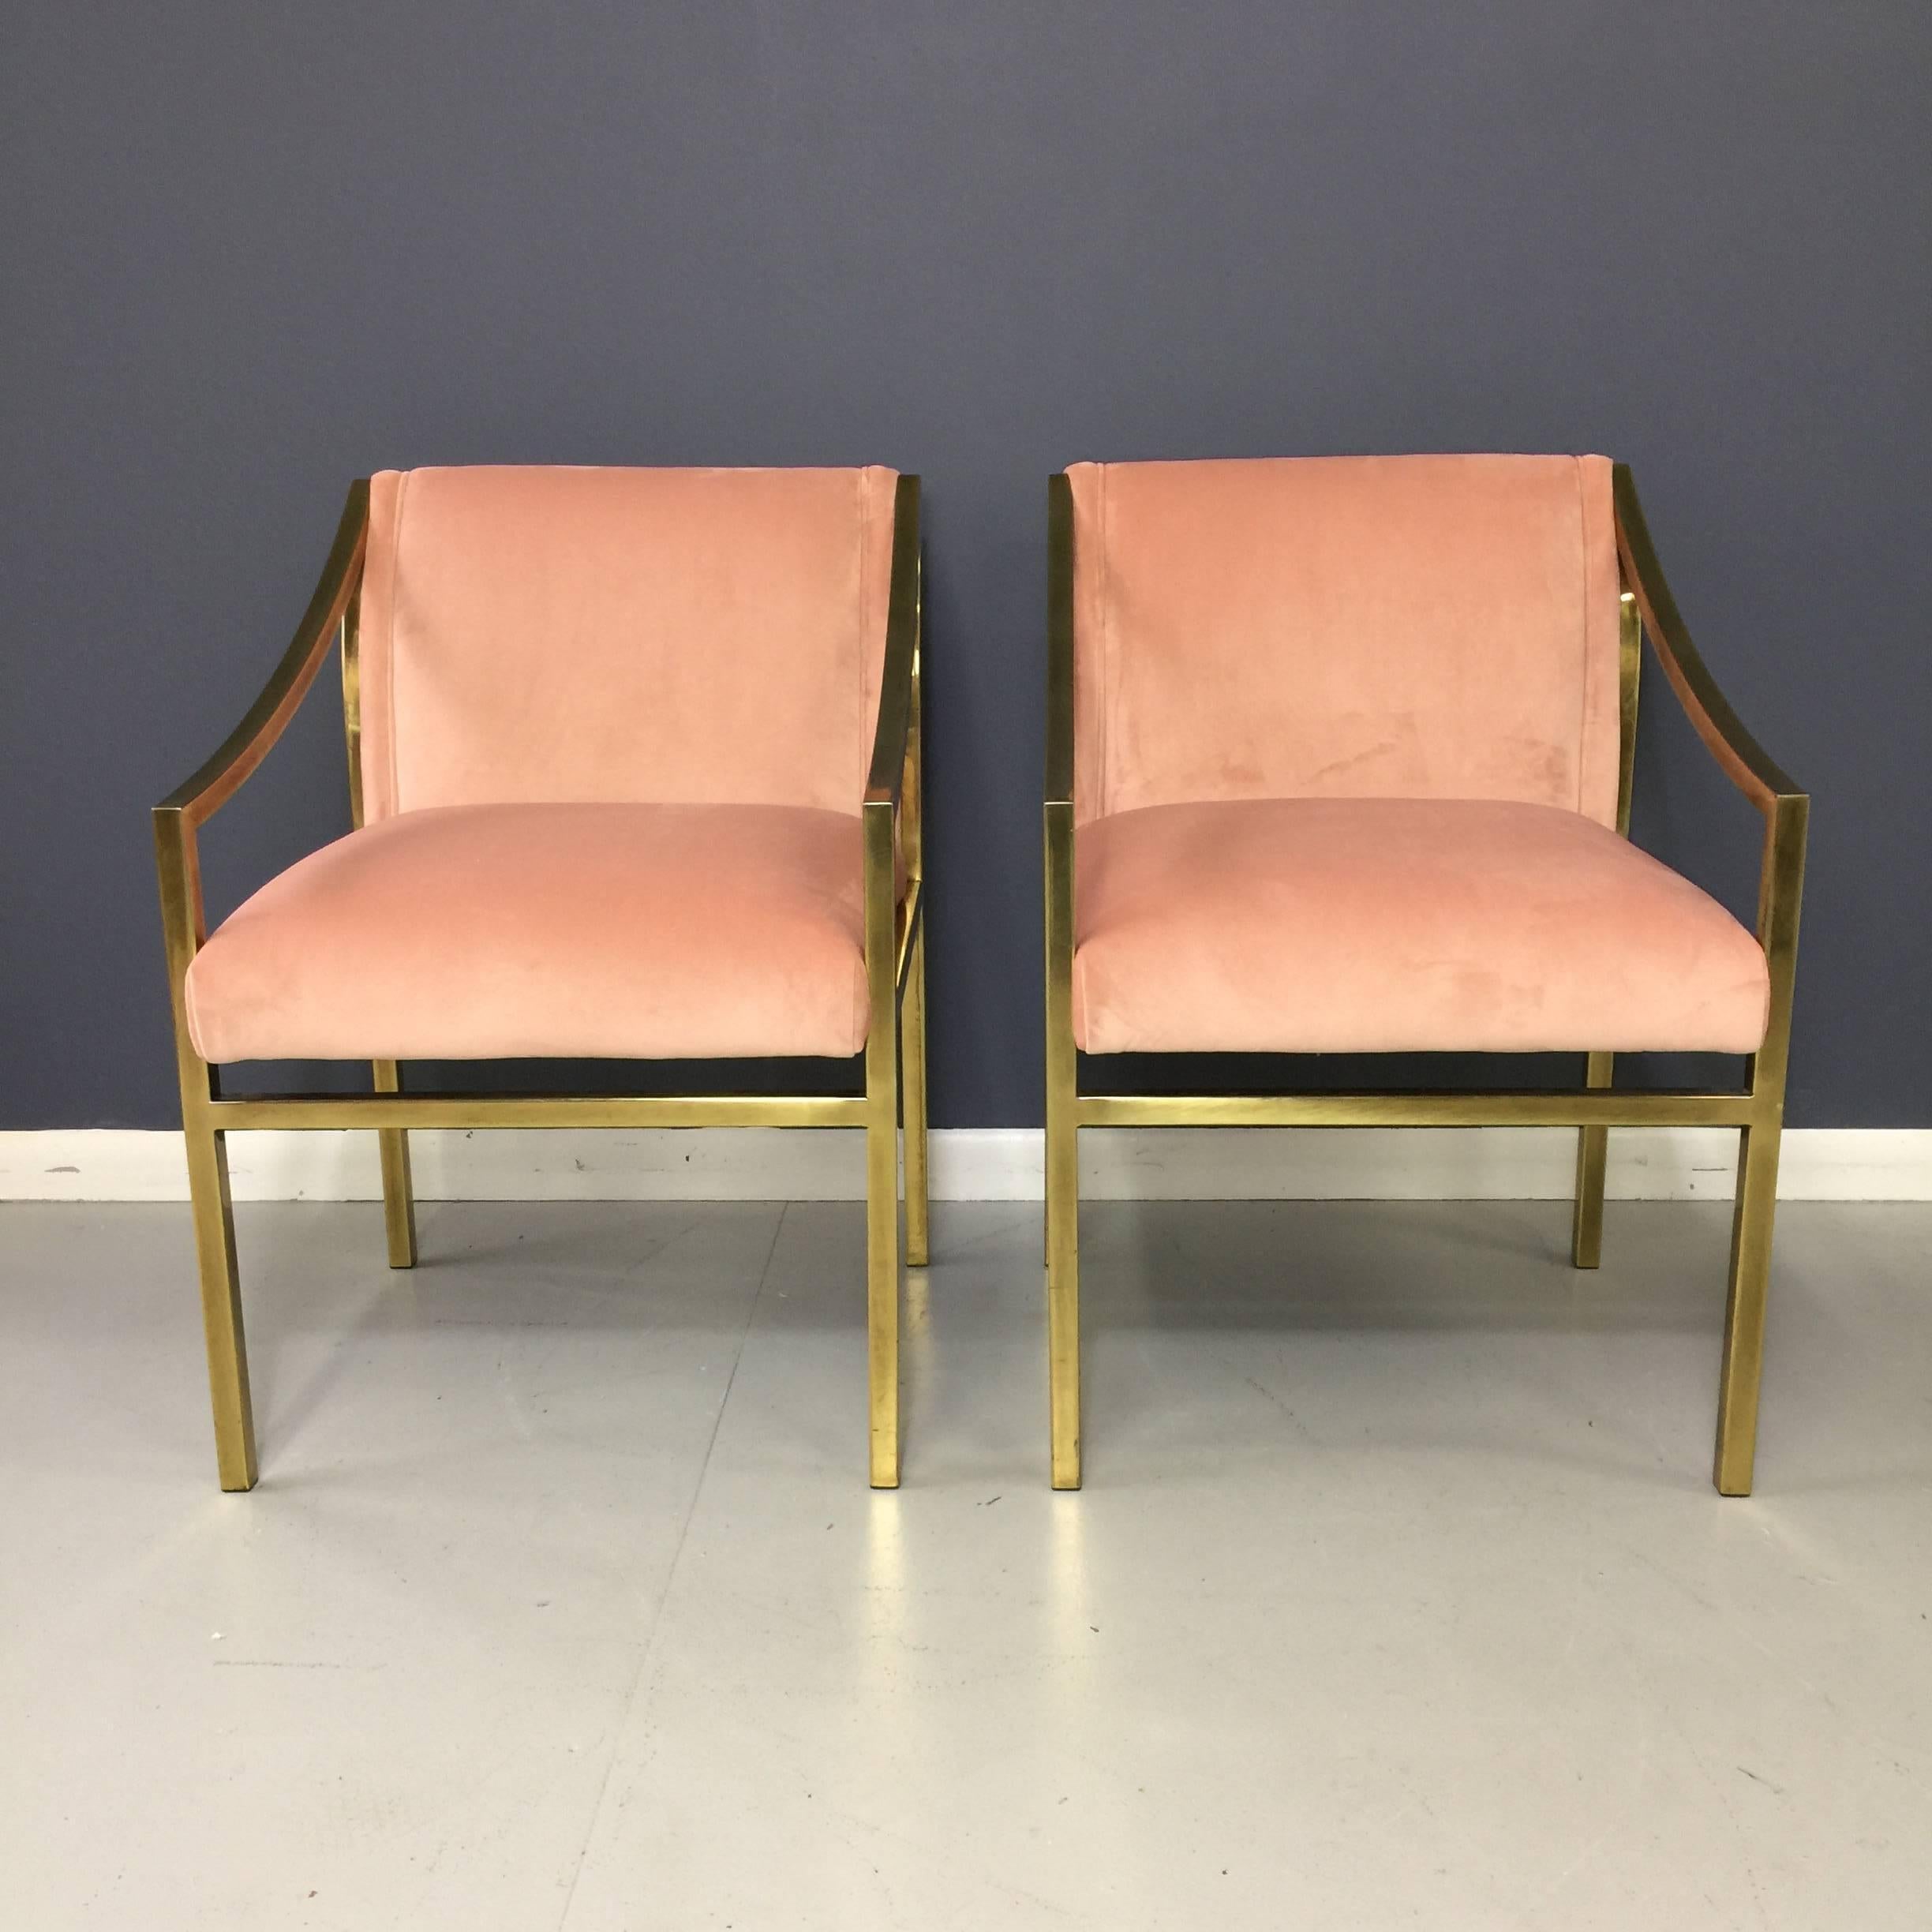 These lovely chairs have been newly upholstered in a lush pink velvet. Brass frames show patina and wear, adding to their charm.